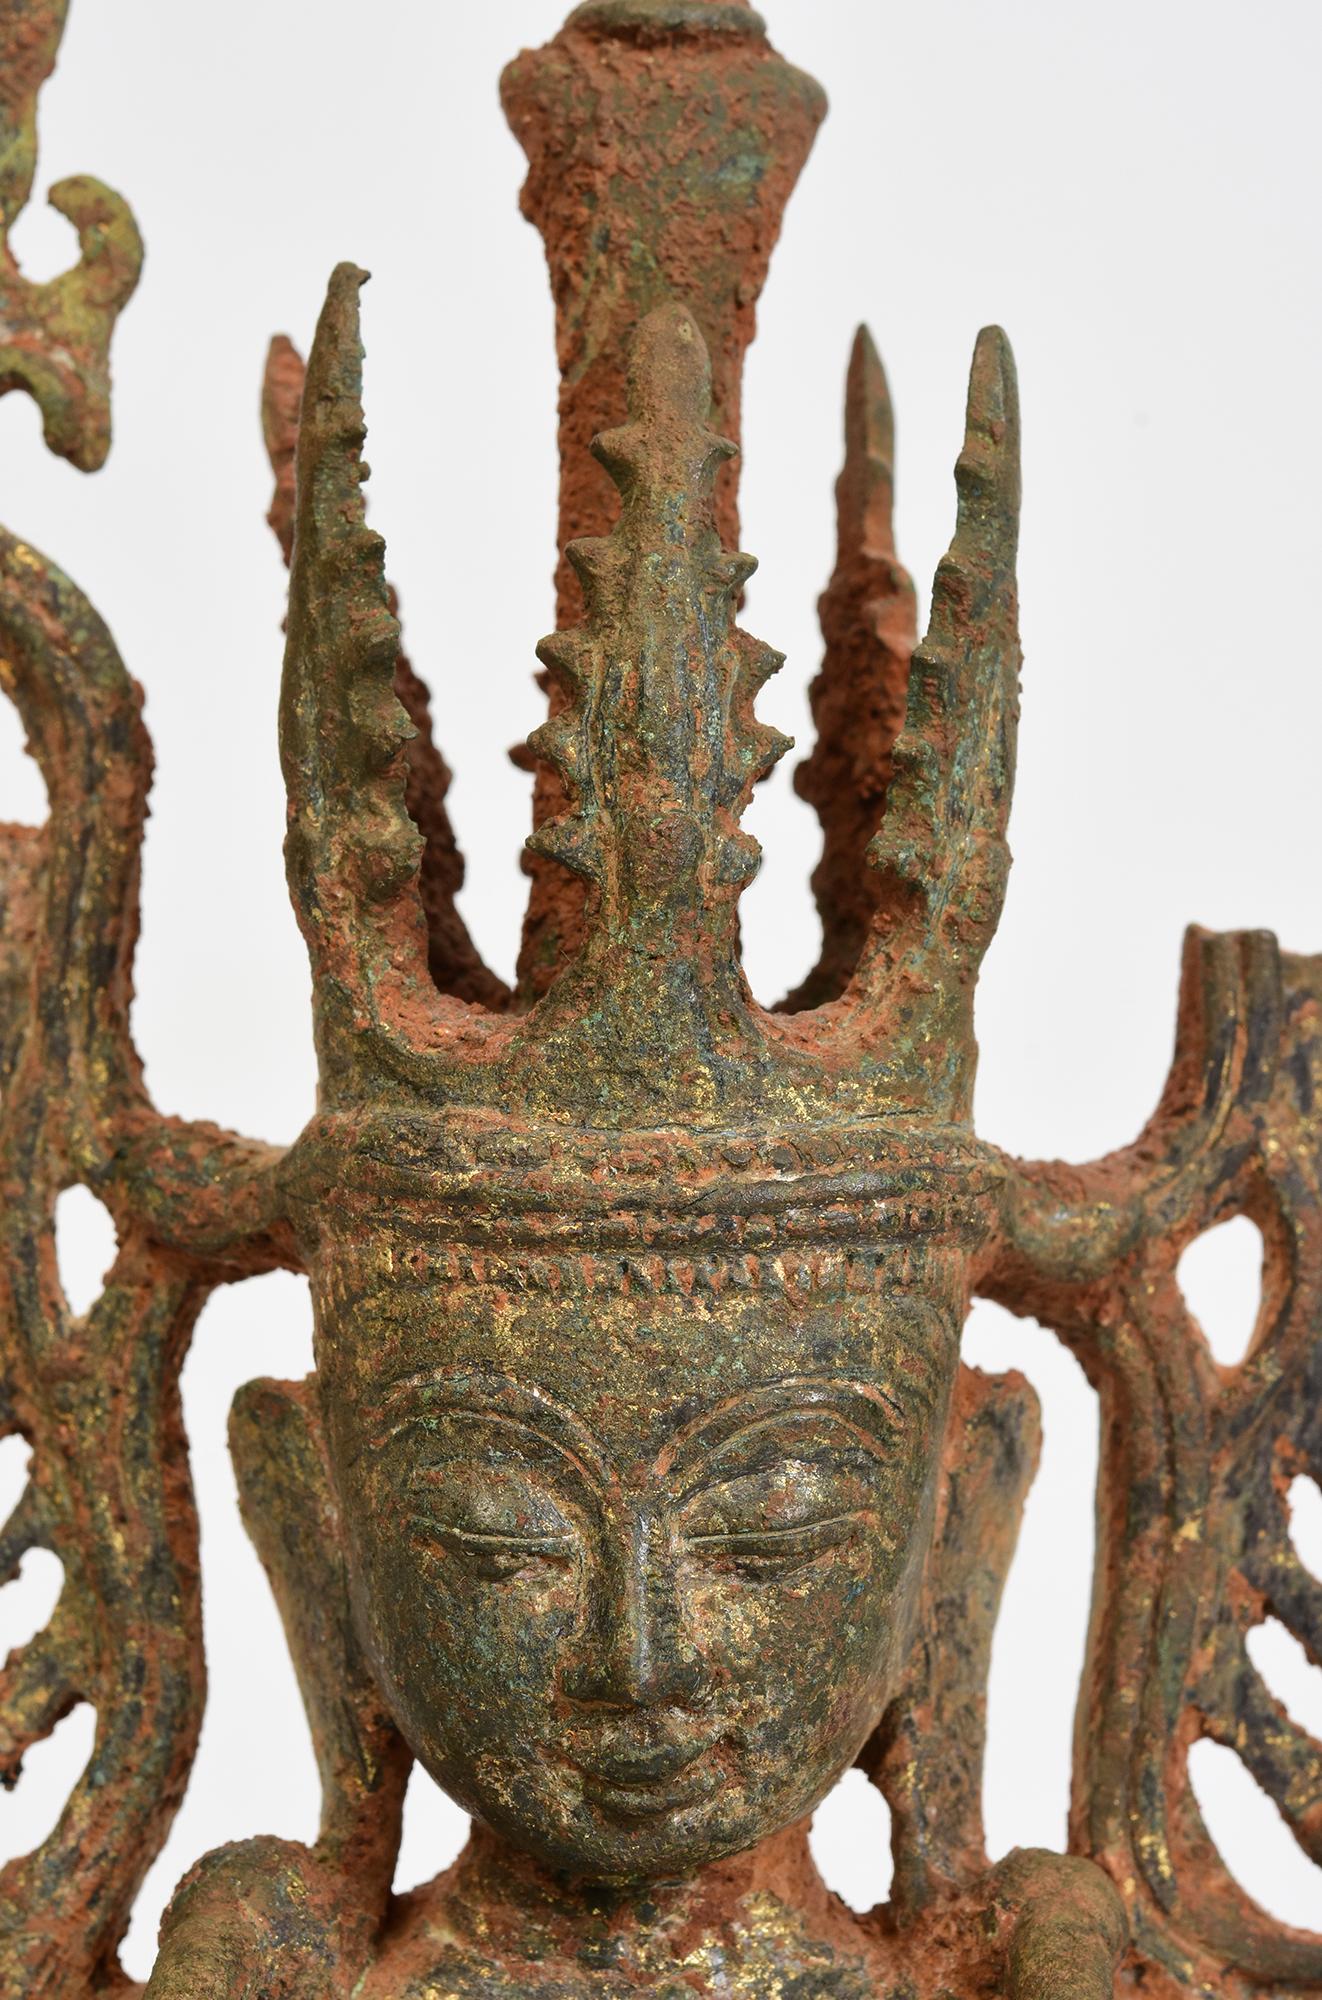 Antique Burmese bronze seated crowned Buddha, or sometimes known as 'King Buddha', wearing diadem-crowns and ornaments of kings instead of ordinary monk's robes.

Crowned Buddha represents the Buddha's role as a universal sovereign. 

Age: Burma,